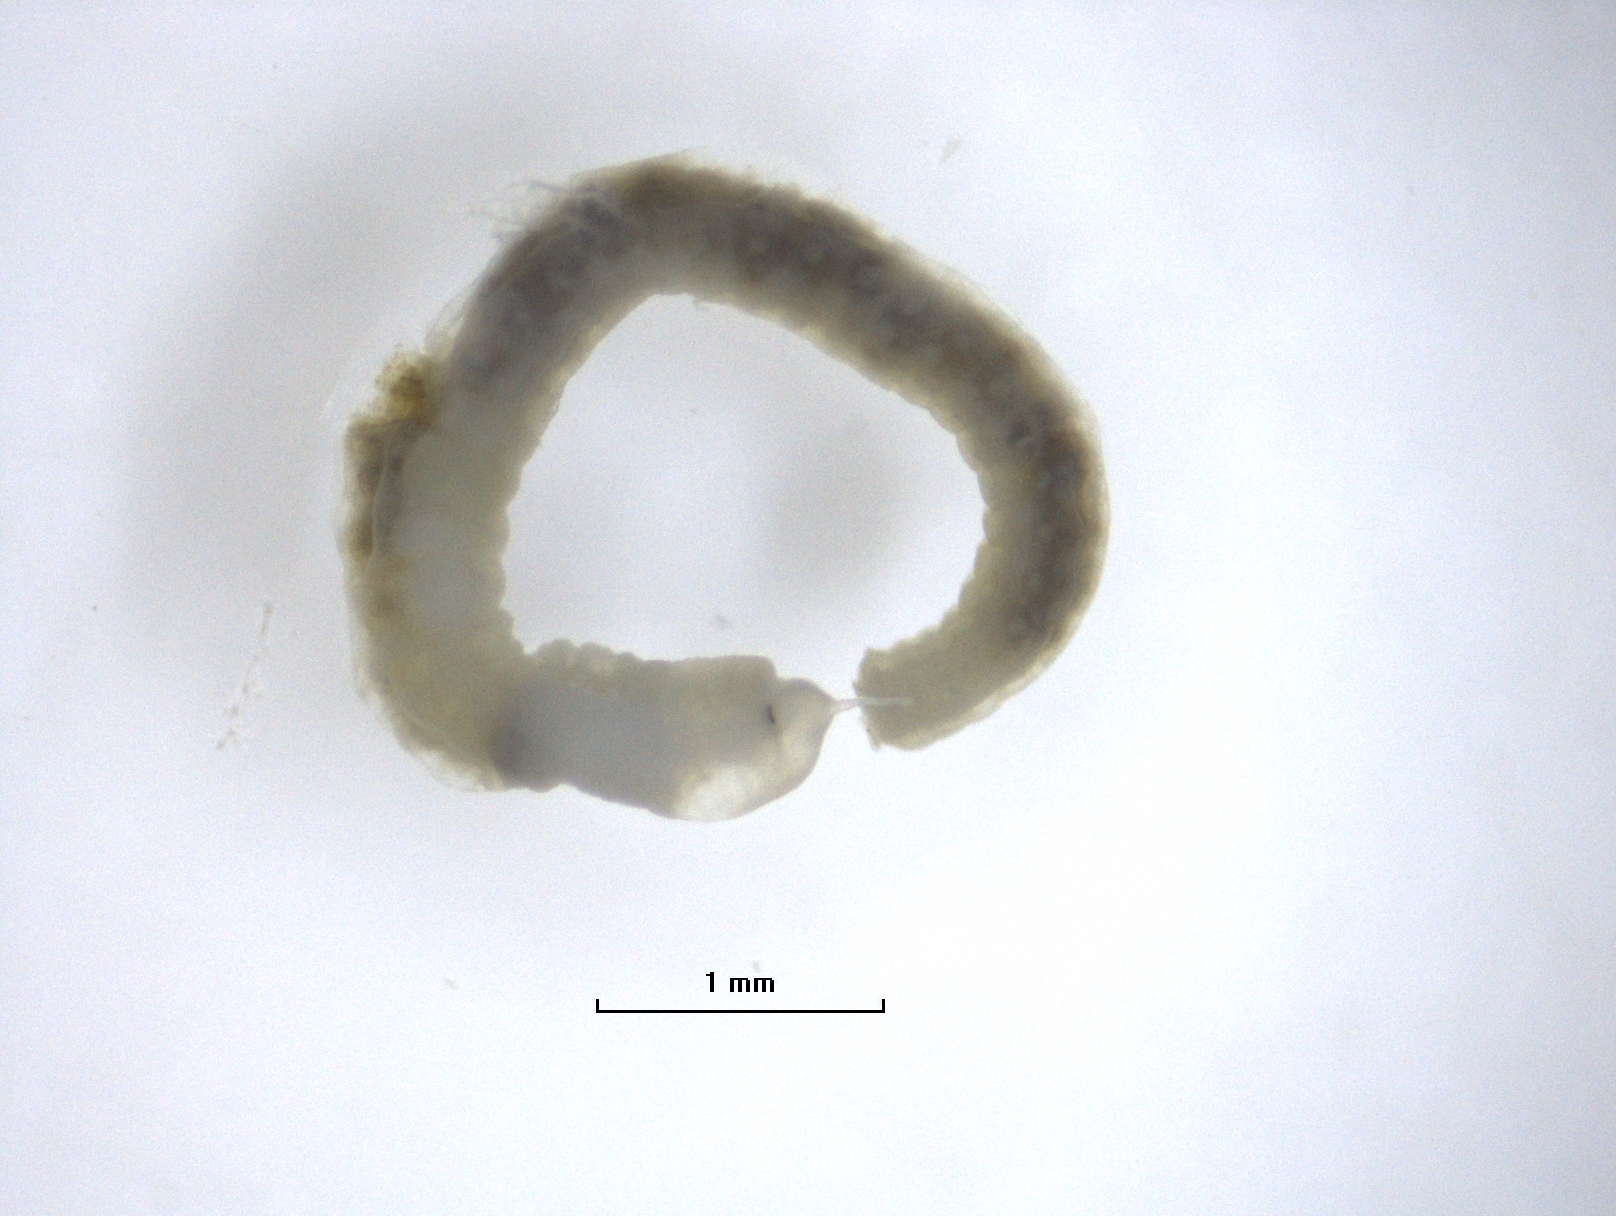 Photomicrograph of a whole worm with eyespots and a proboscis